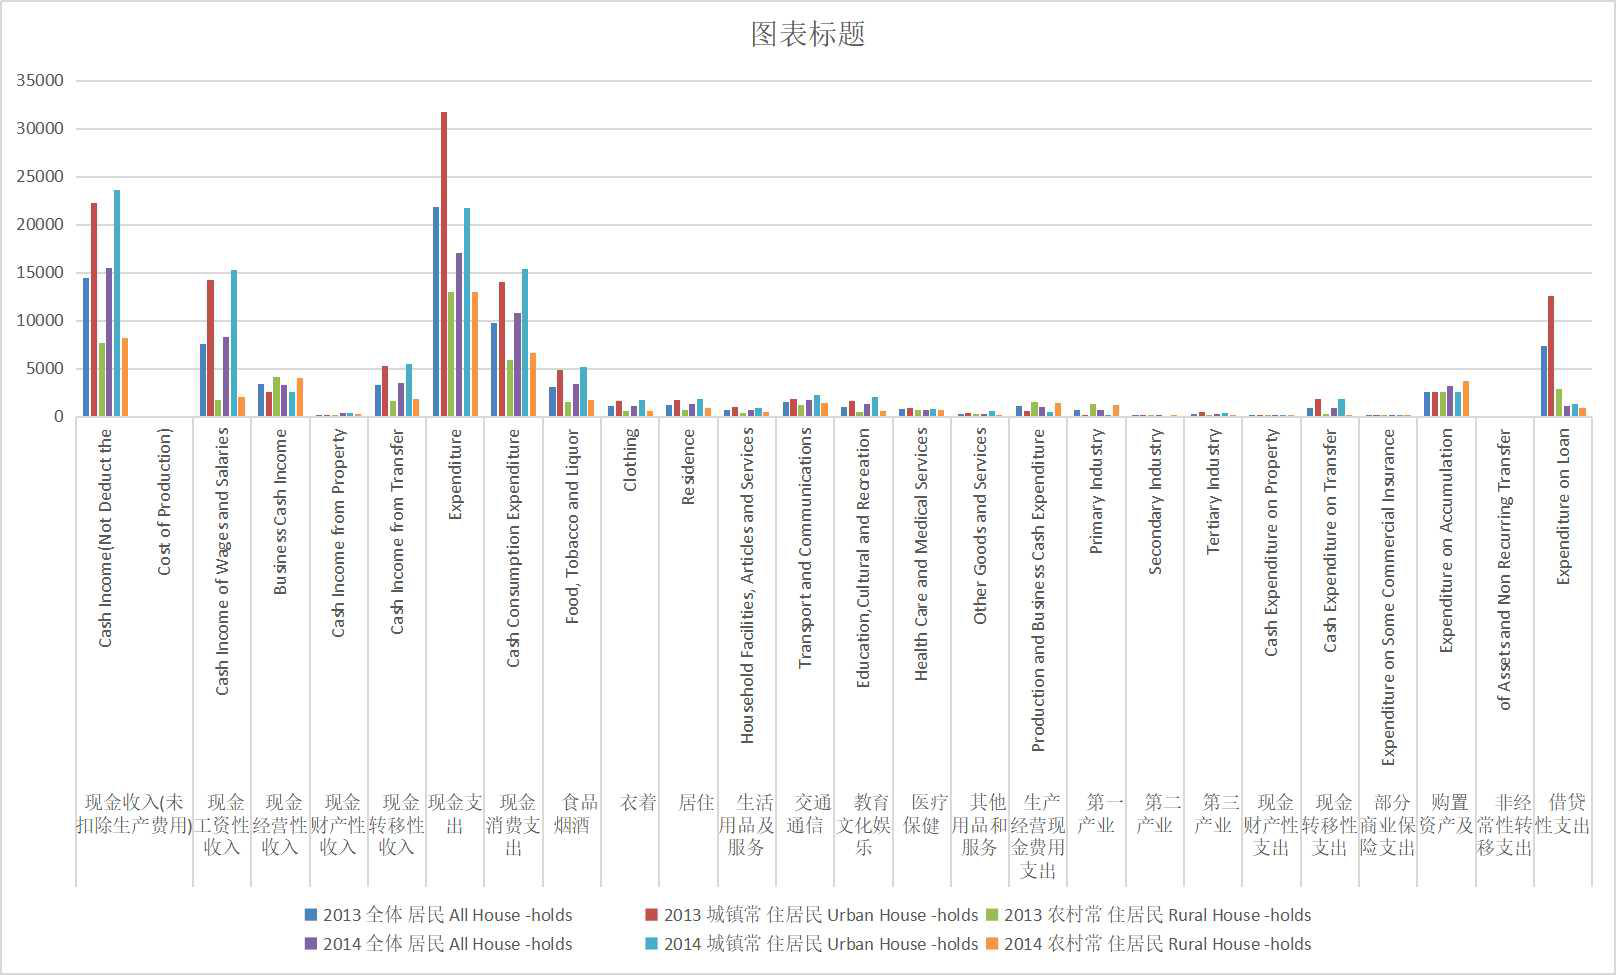 Cash income and expenditure of households in Qinghai Province (2013-2020)